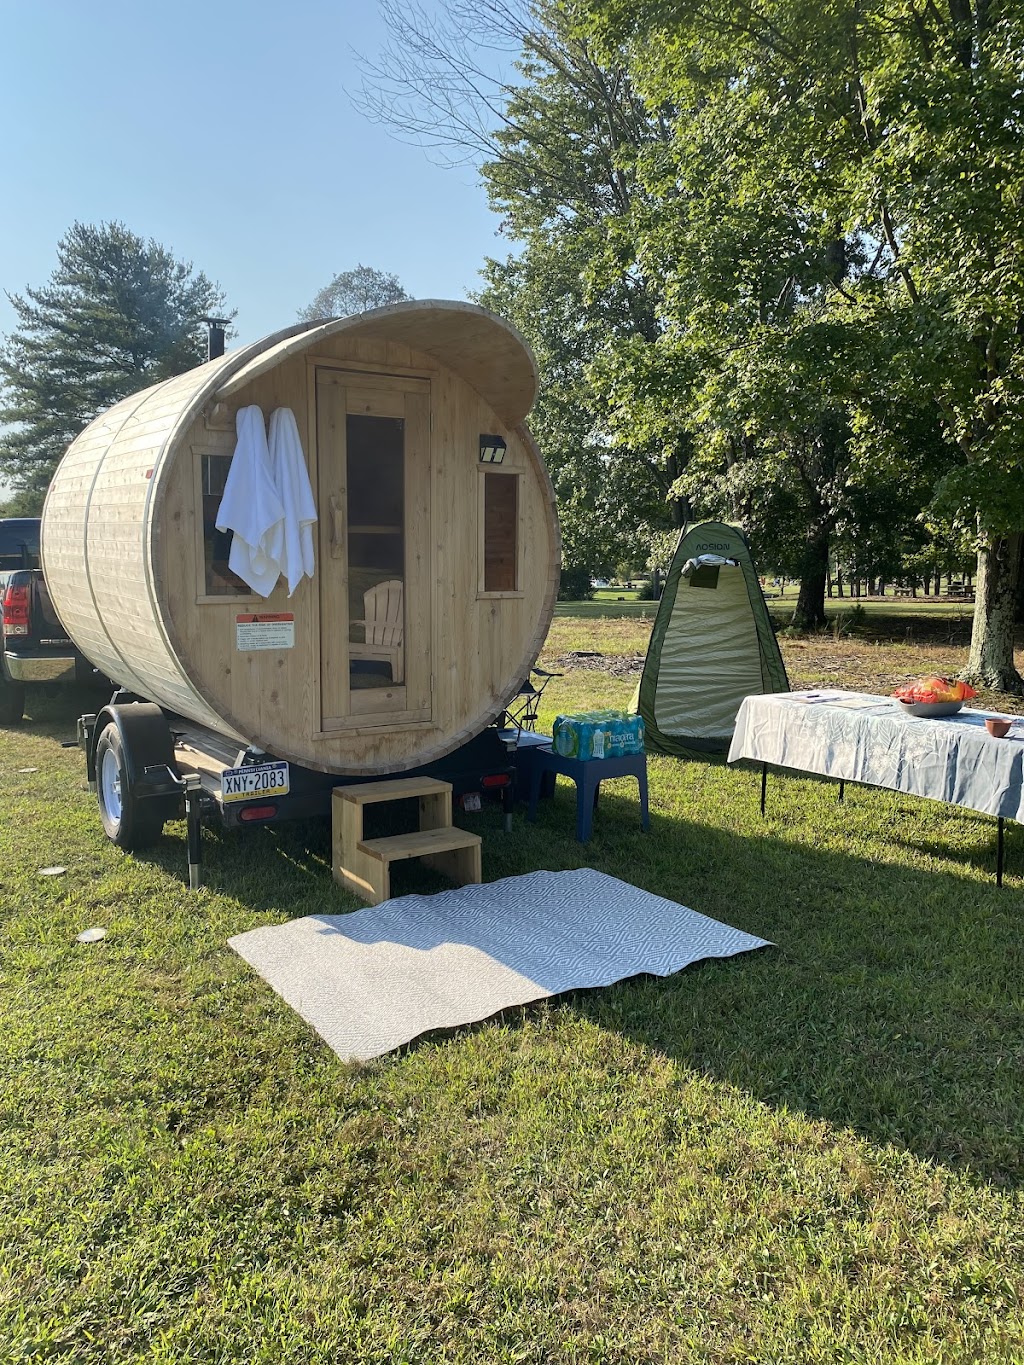 Uforia Mobile Sauna and Cold Plunge | 5638 N Coplay Rd, Whitehall, PA 18052 | Phone: (484) 747-7702